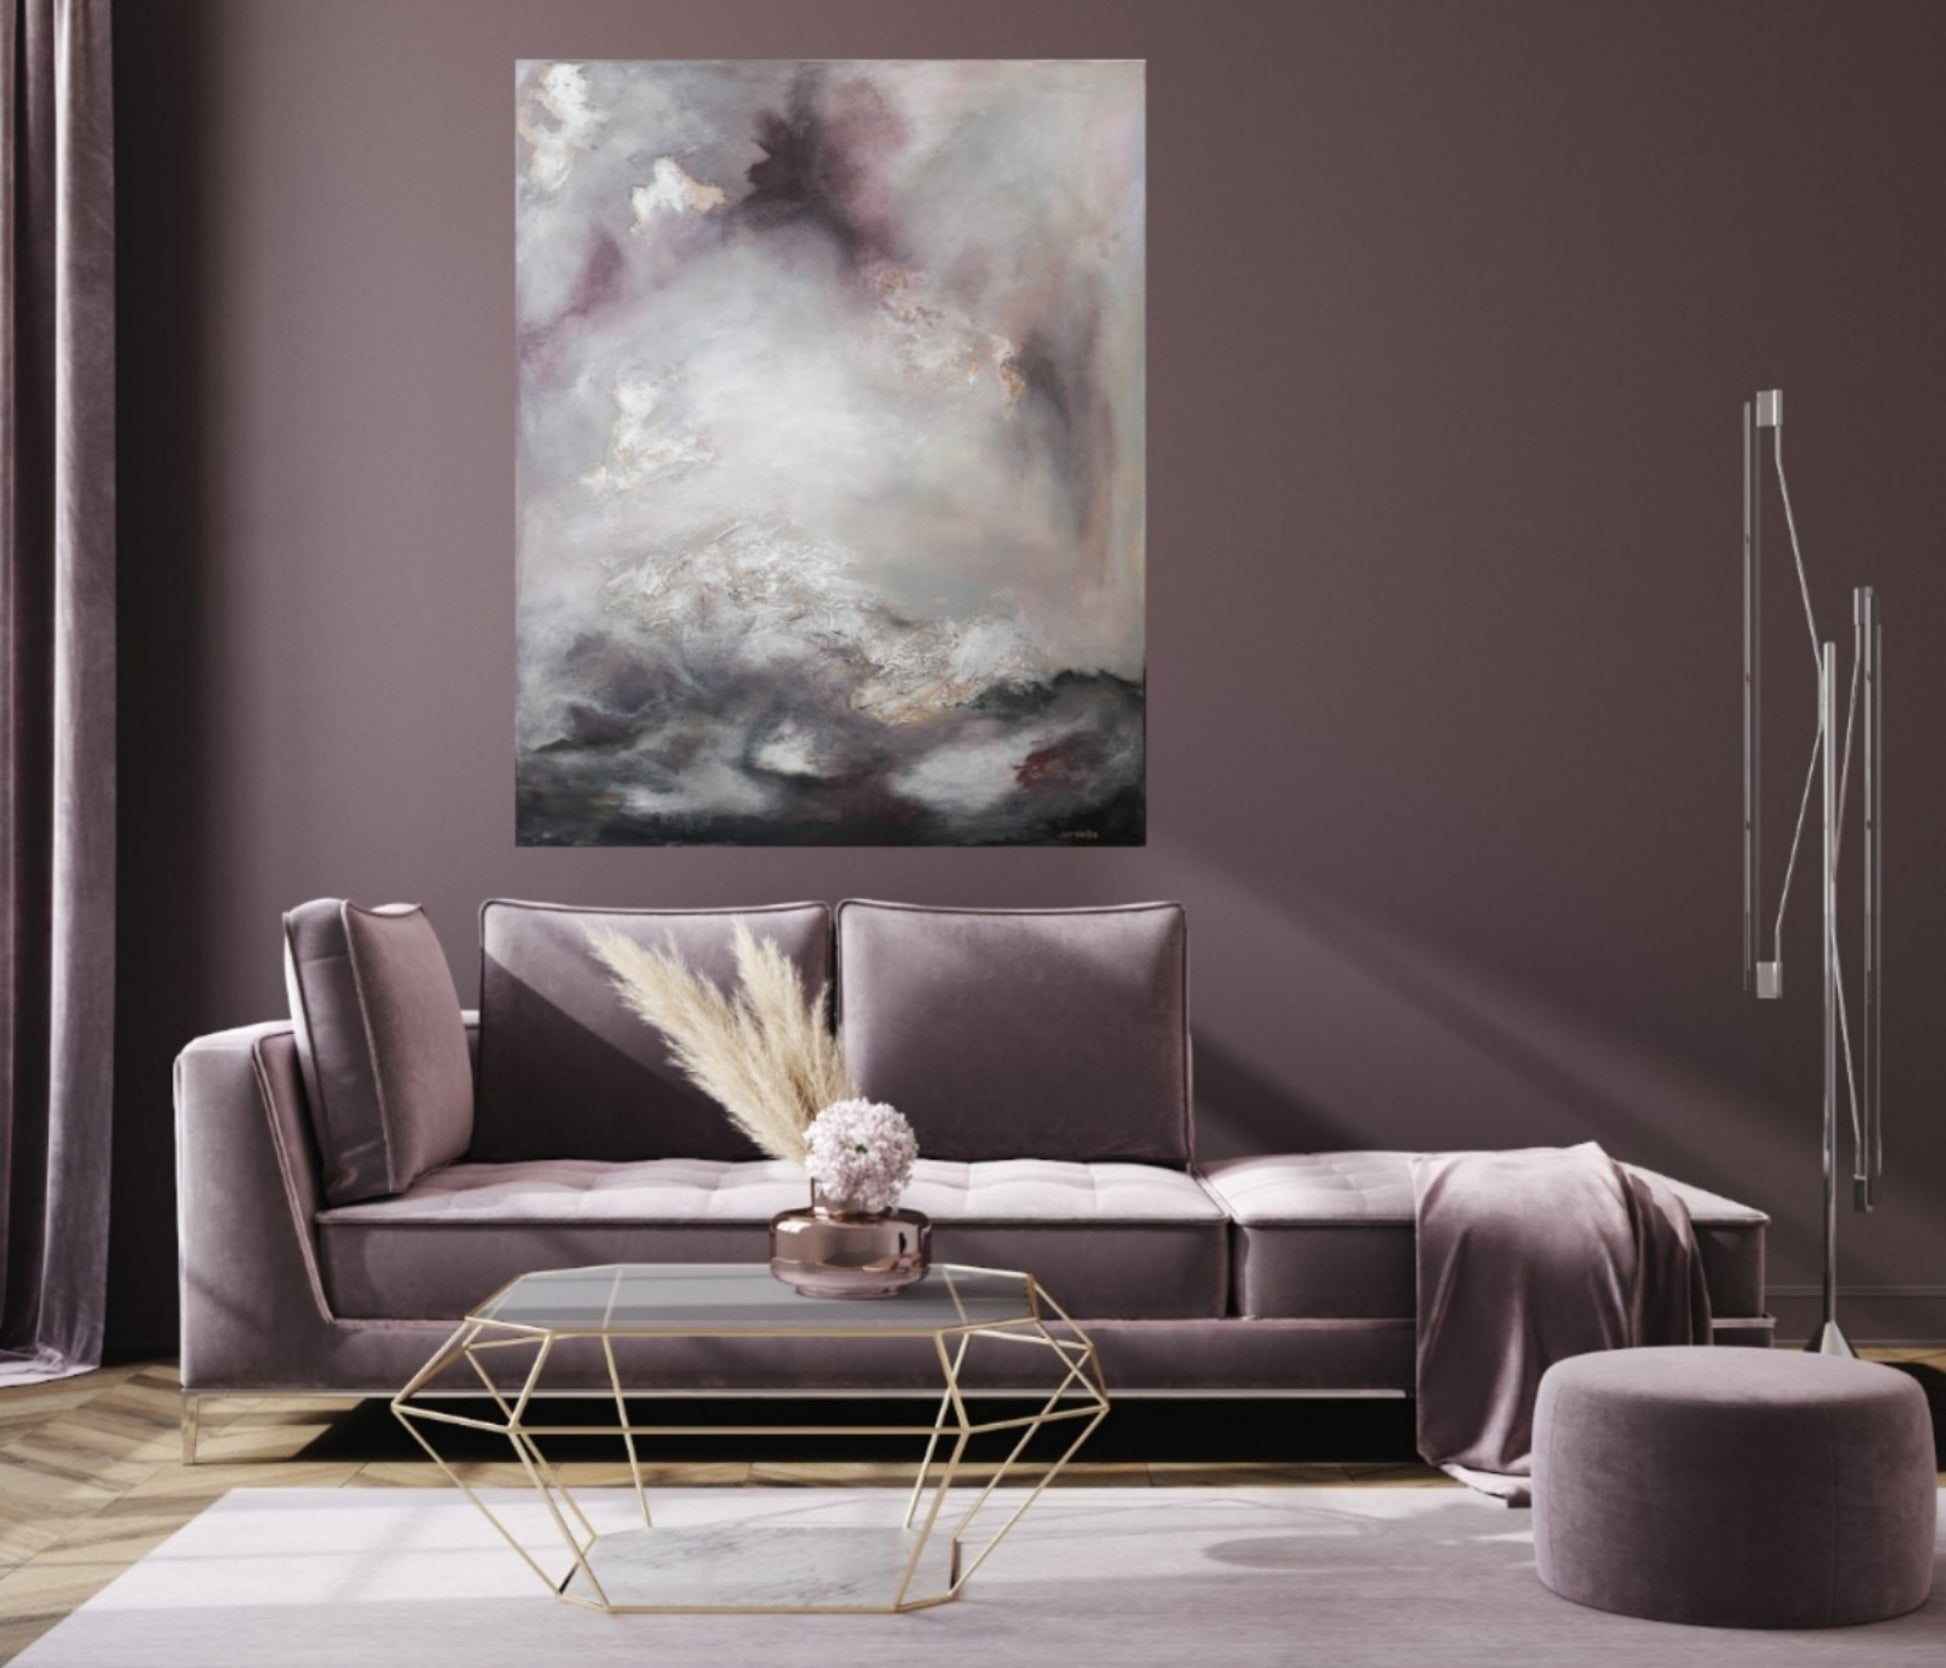 Large abstract artwork in the luxury living room.